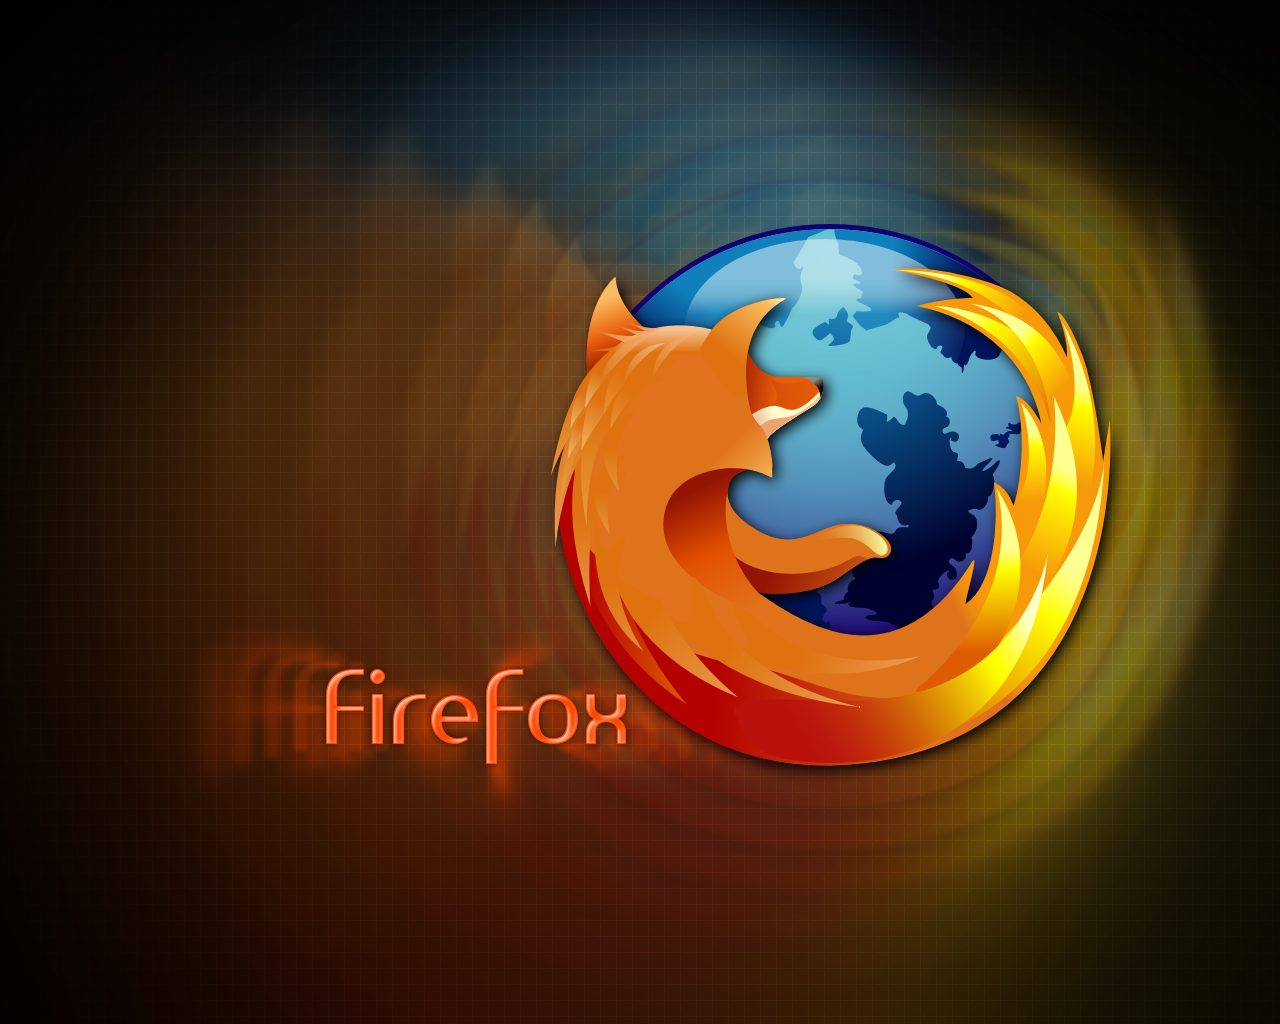 Firefox Wallpaper Set 7 Awesome Wallpapers